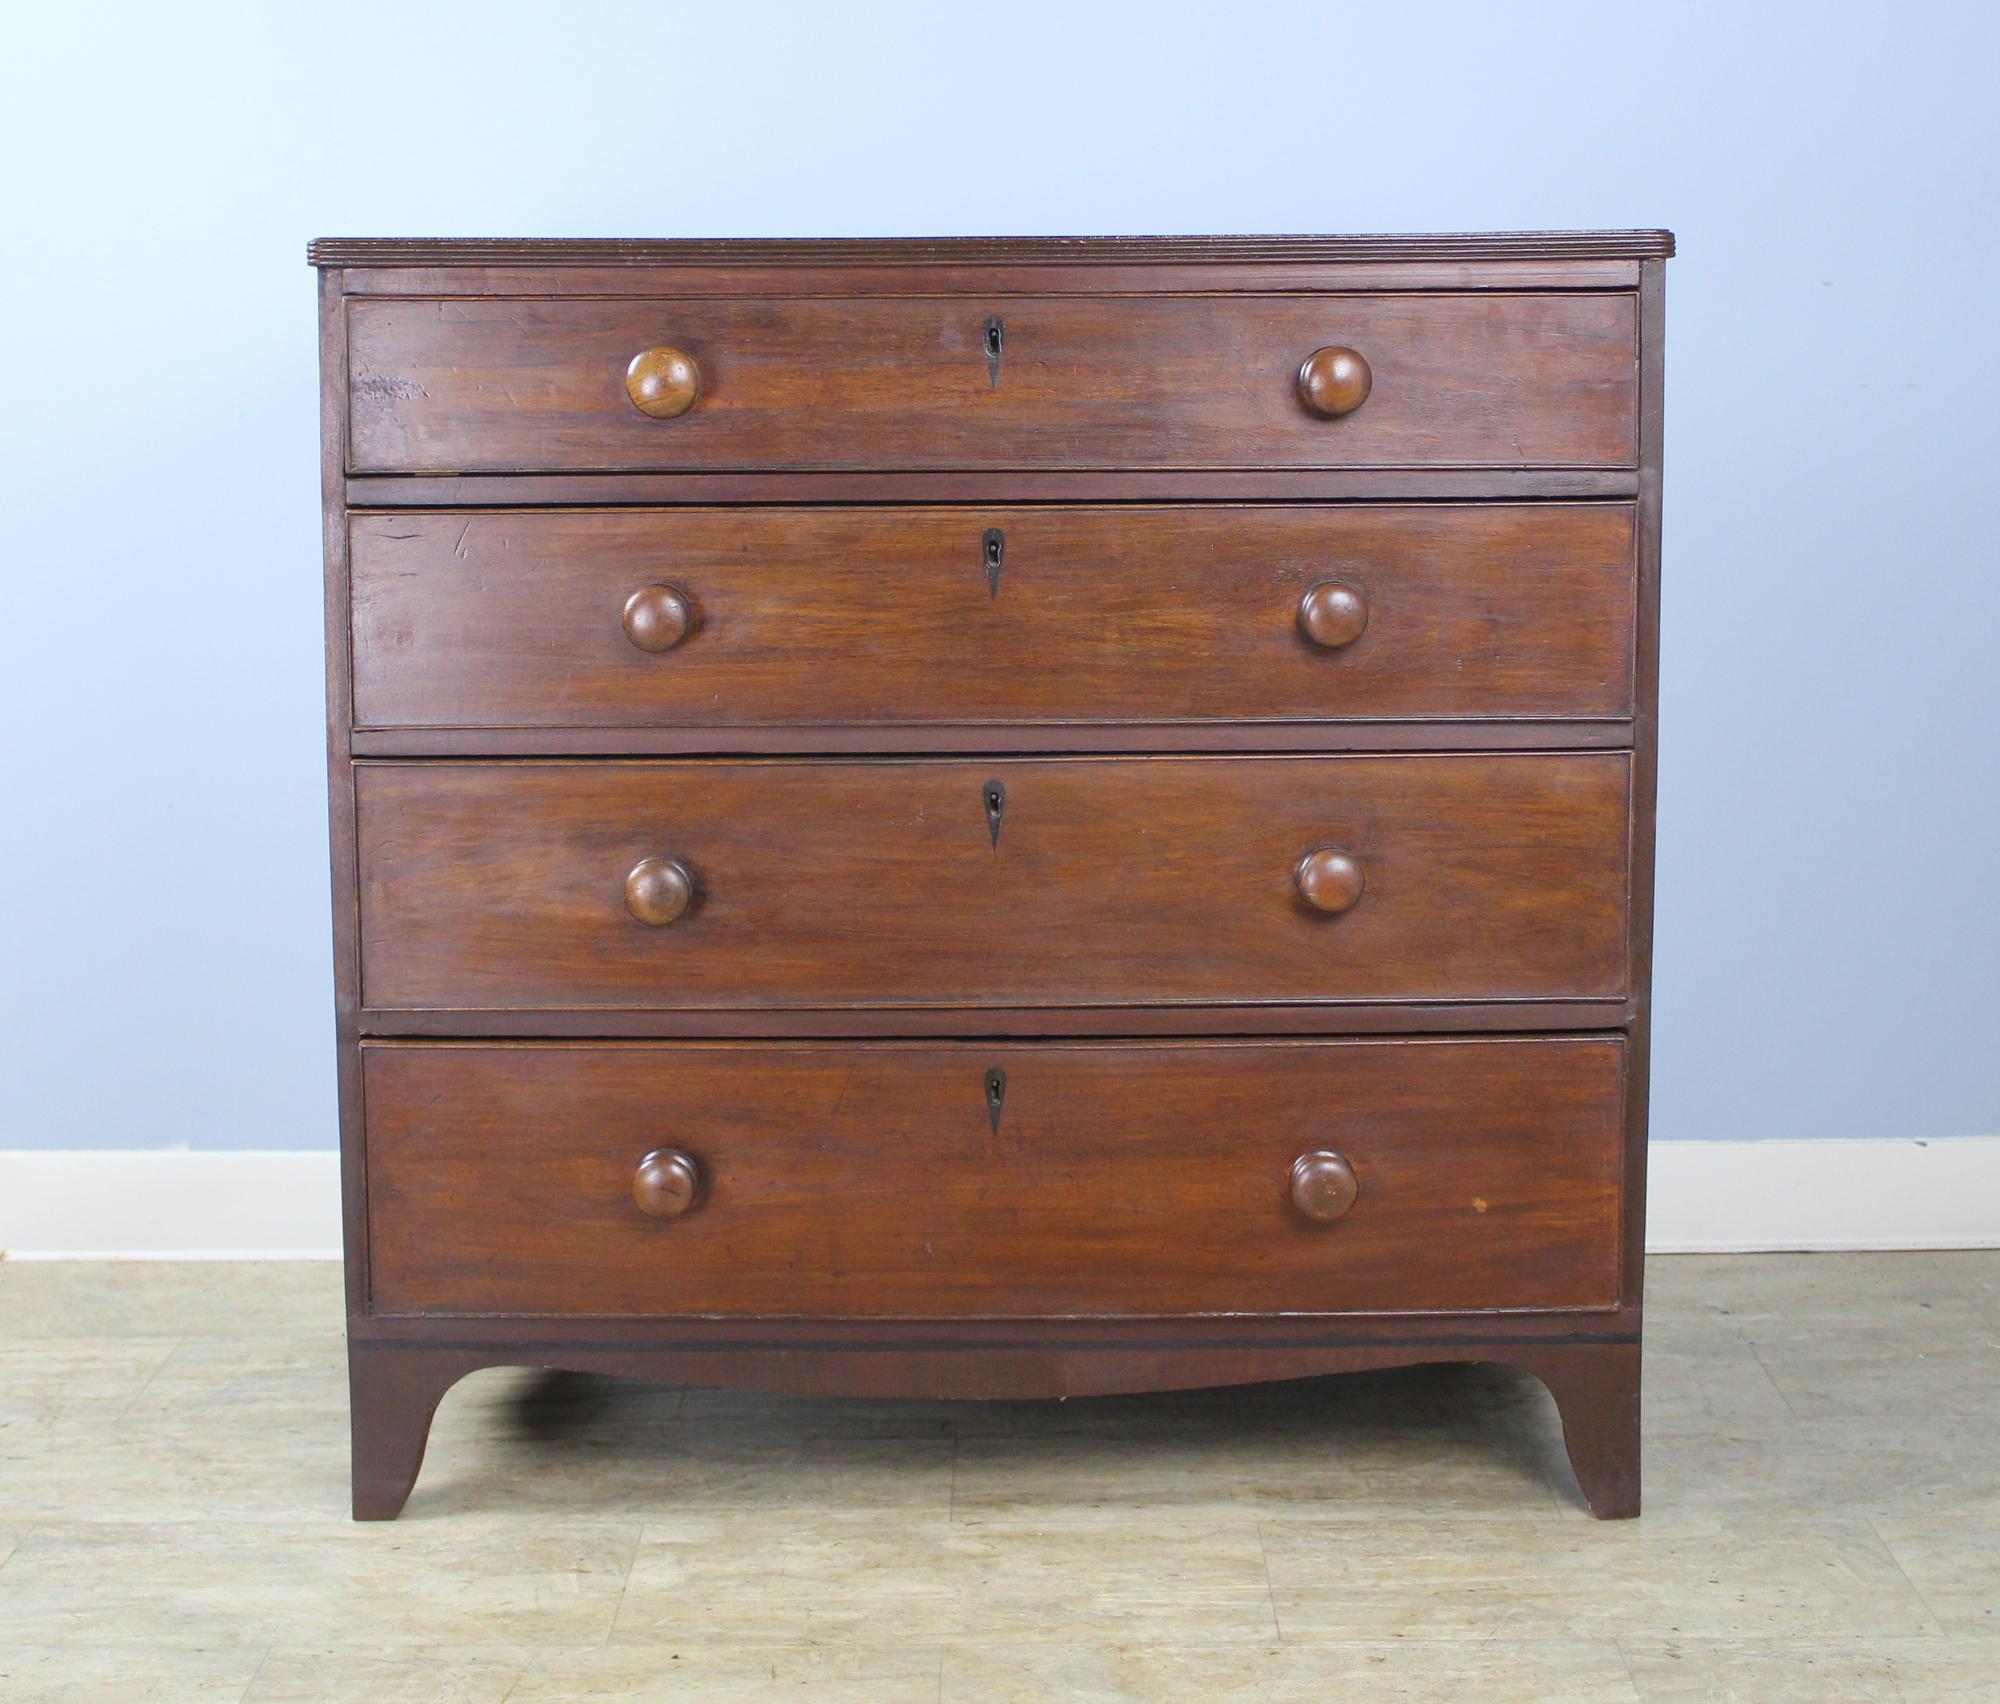 A handsome early English chest with deep drawers inlaid with ebony detail. Classic round knobs. There is a small reeding around the edge of the top, typical of the period. Flared feet add to the look. Note: The top has been completely refinished.